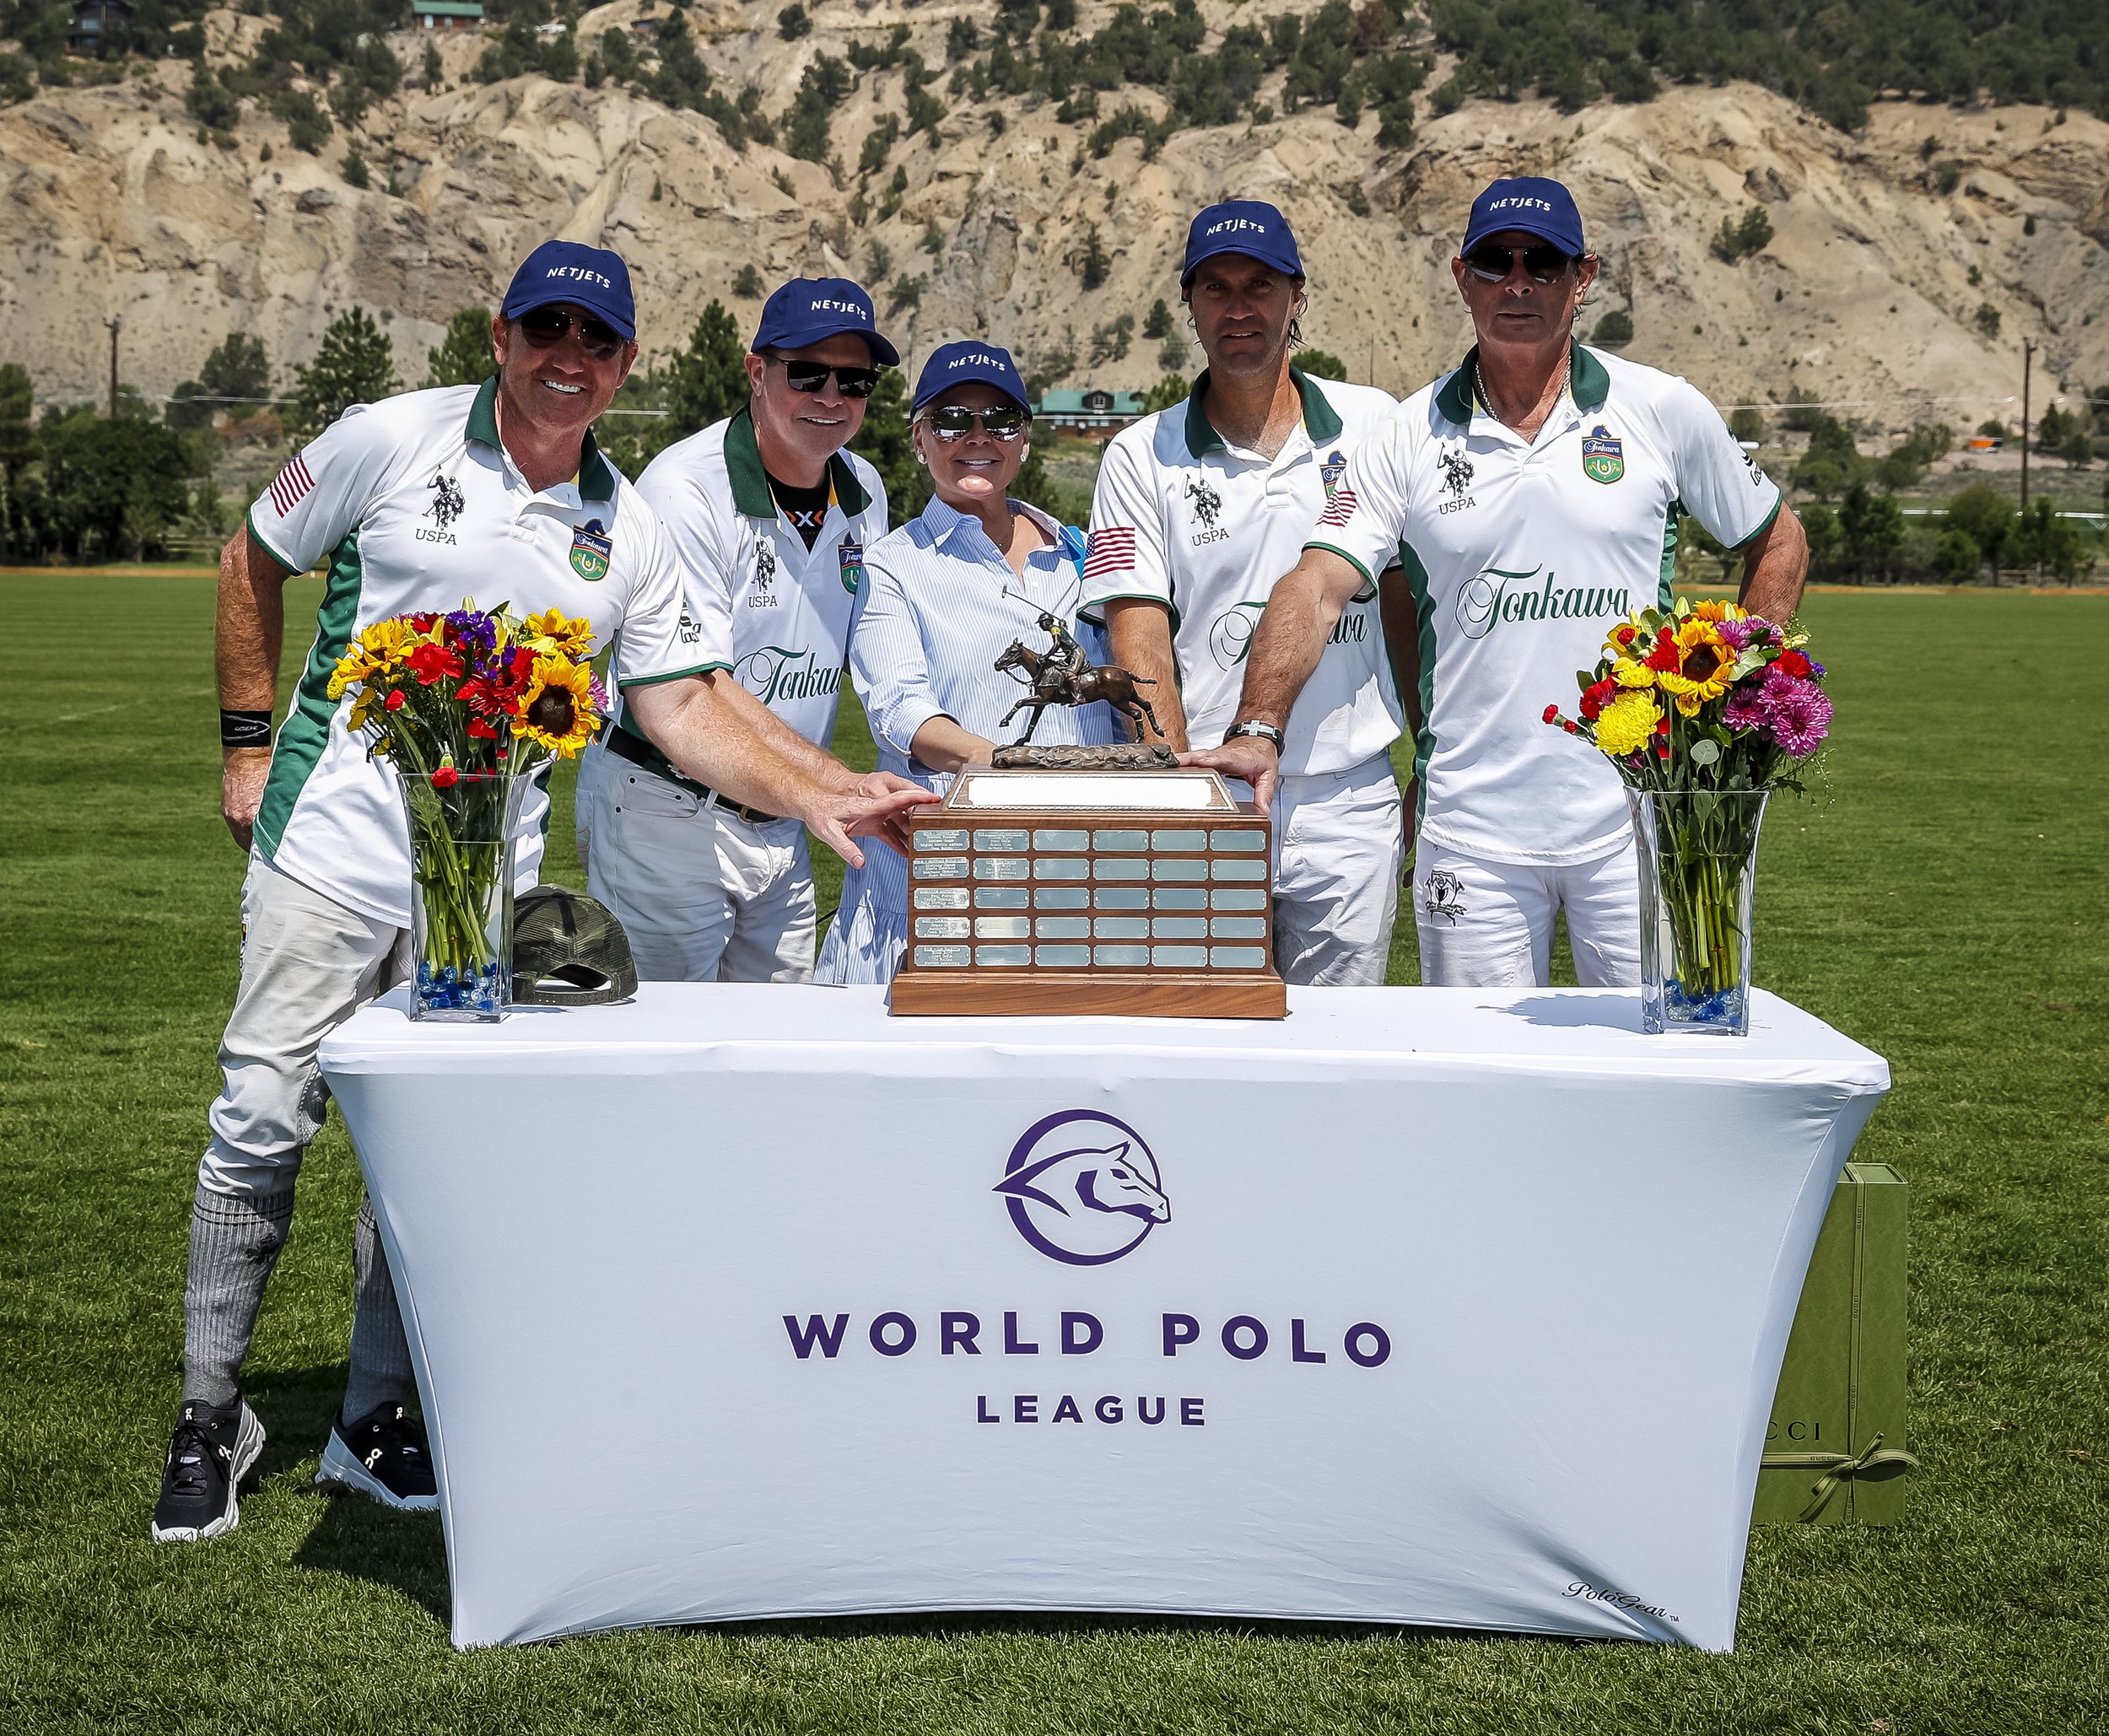 Triple Crown Of Polo, Maroon Bells Cup, Summer Polo Charity Classic Head  Biggest Weekend At Aspen Valley Polo Club — Aspen Valley Polo Club